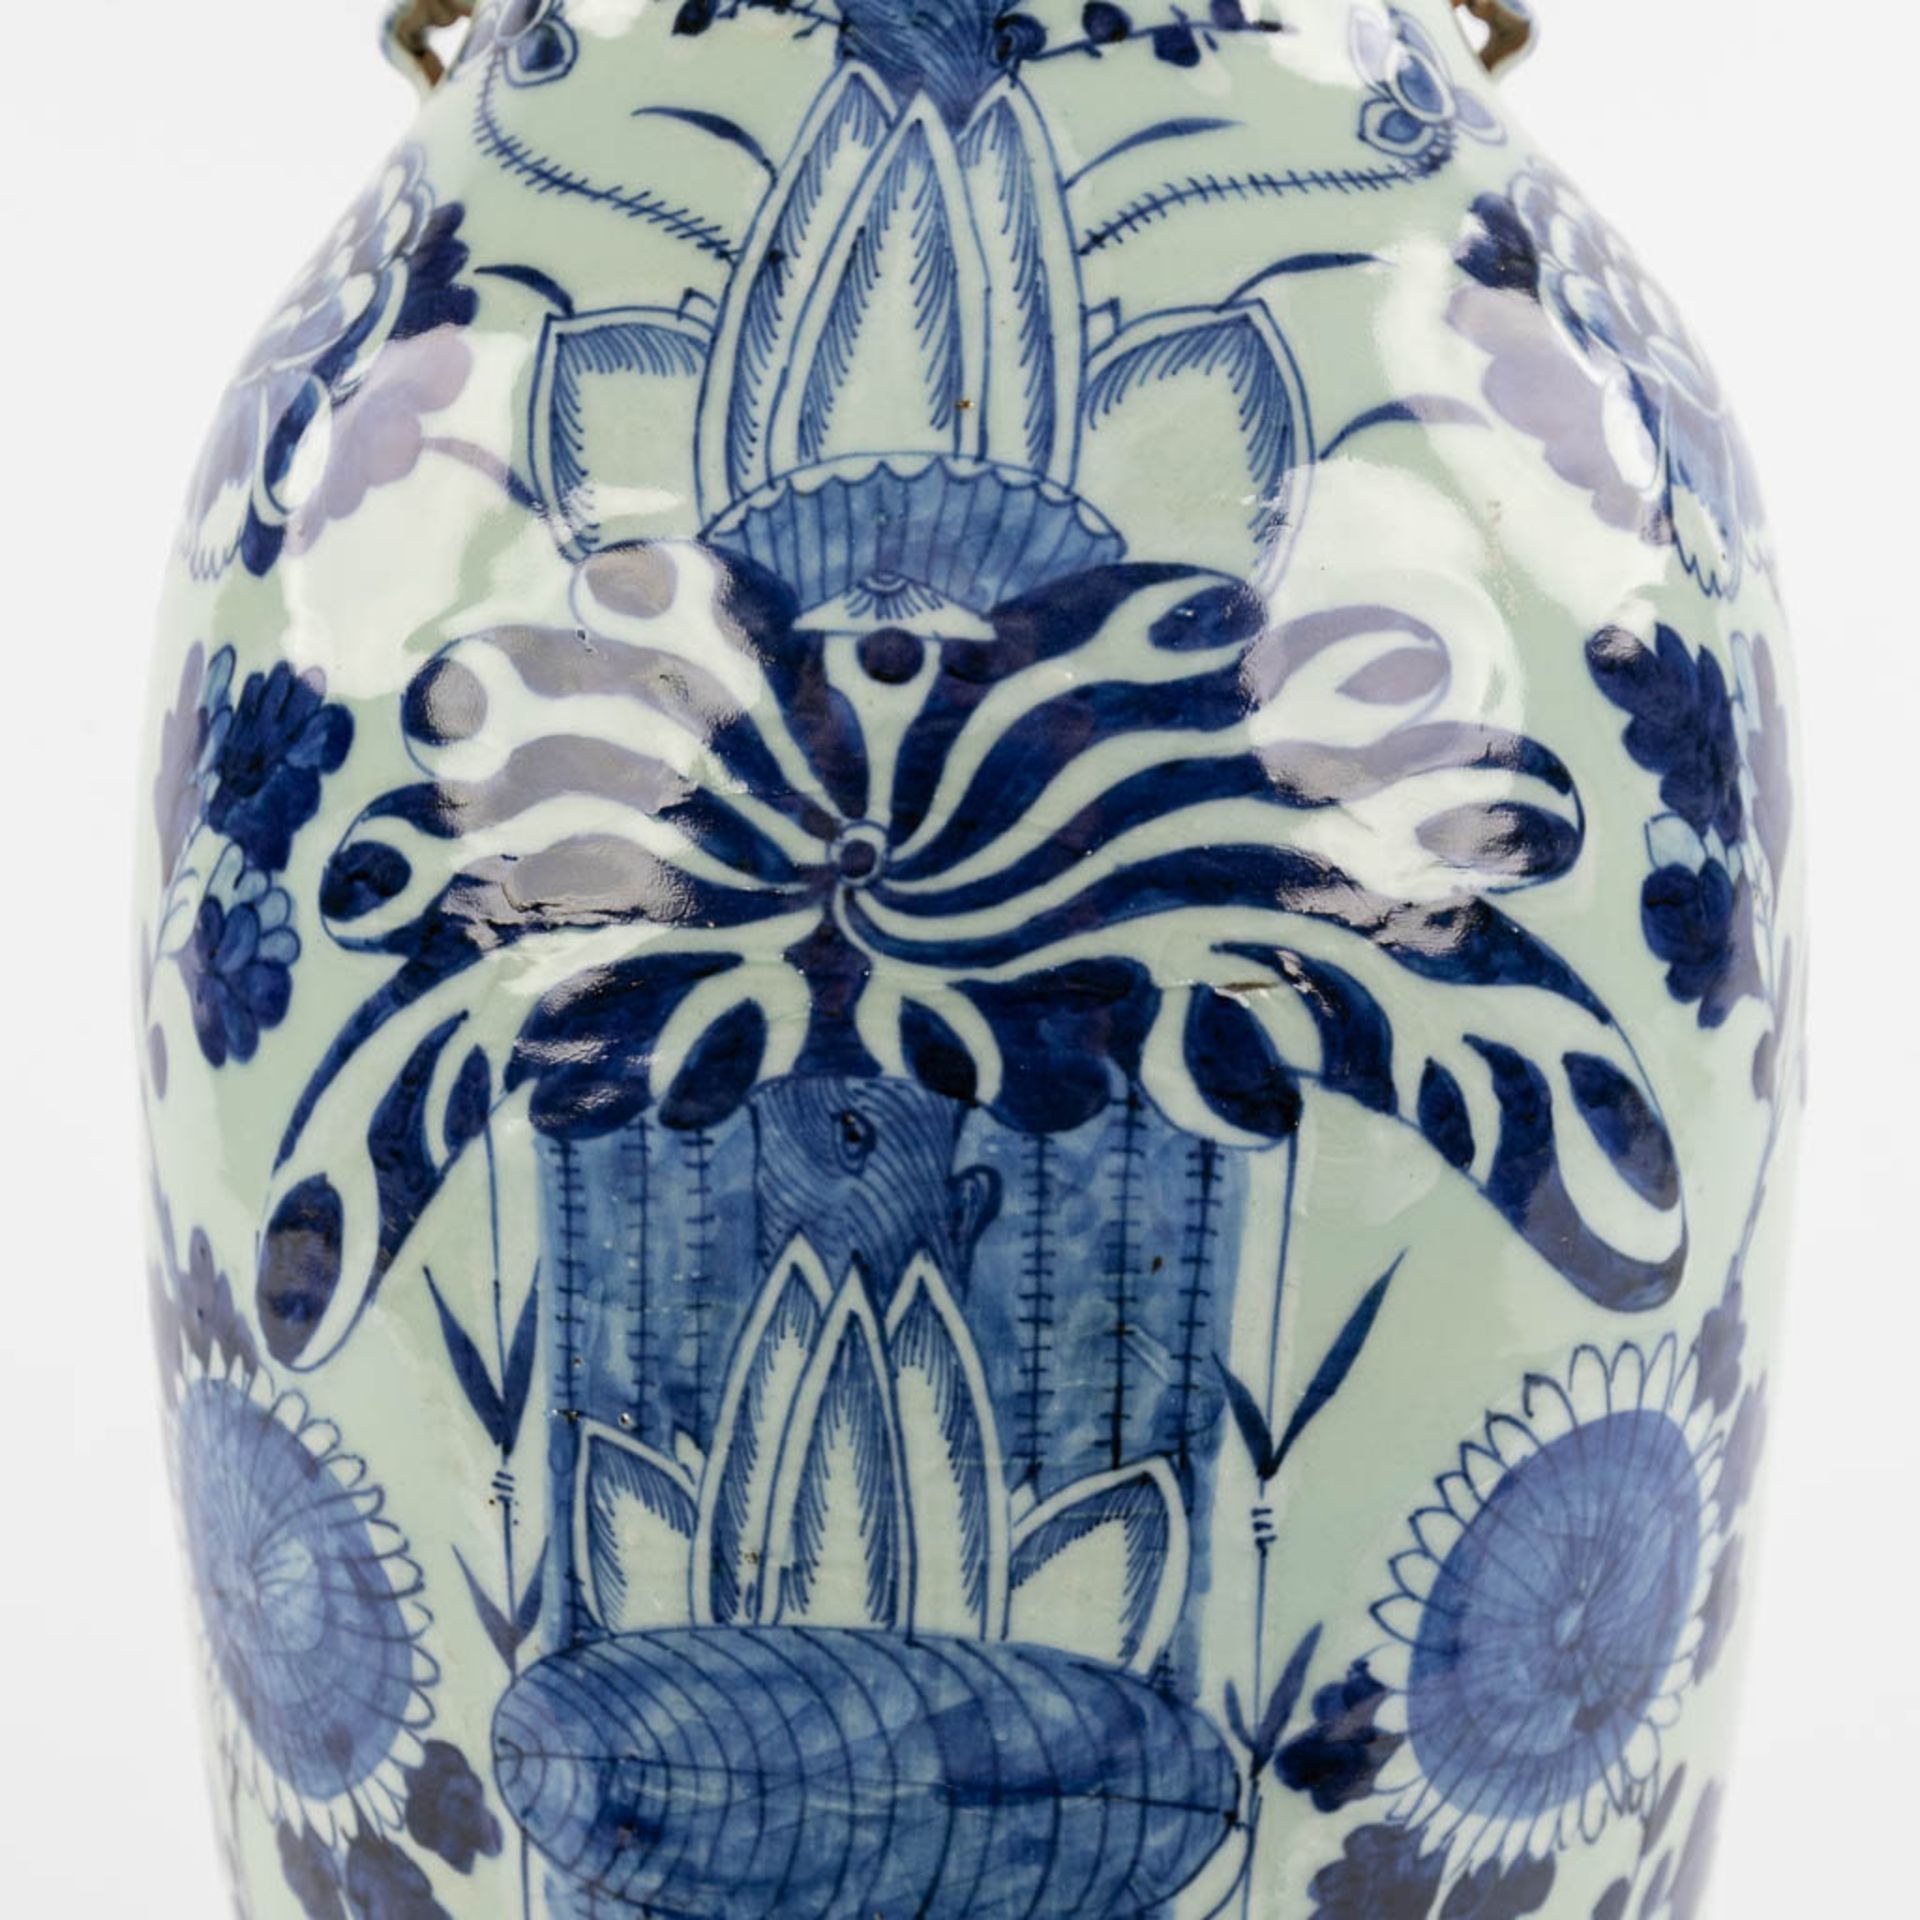 A Chinese Celadon vase with floral decor. 19th/20th C. (H:59 x D:21 cm) - Image 10 of 11